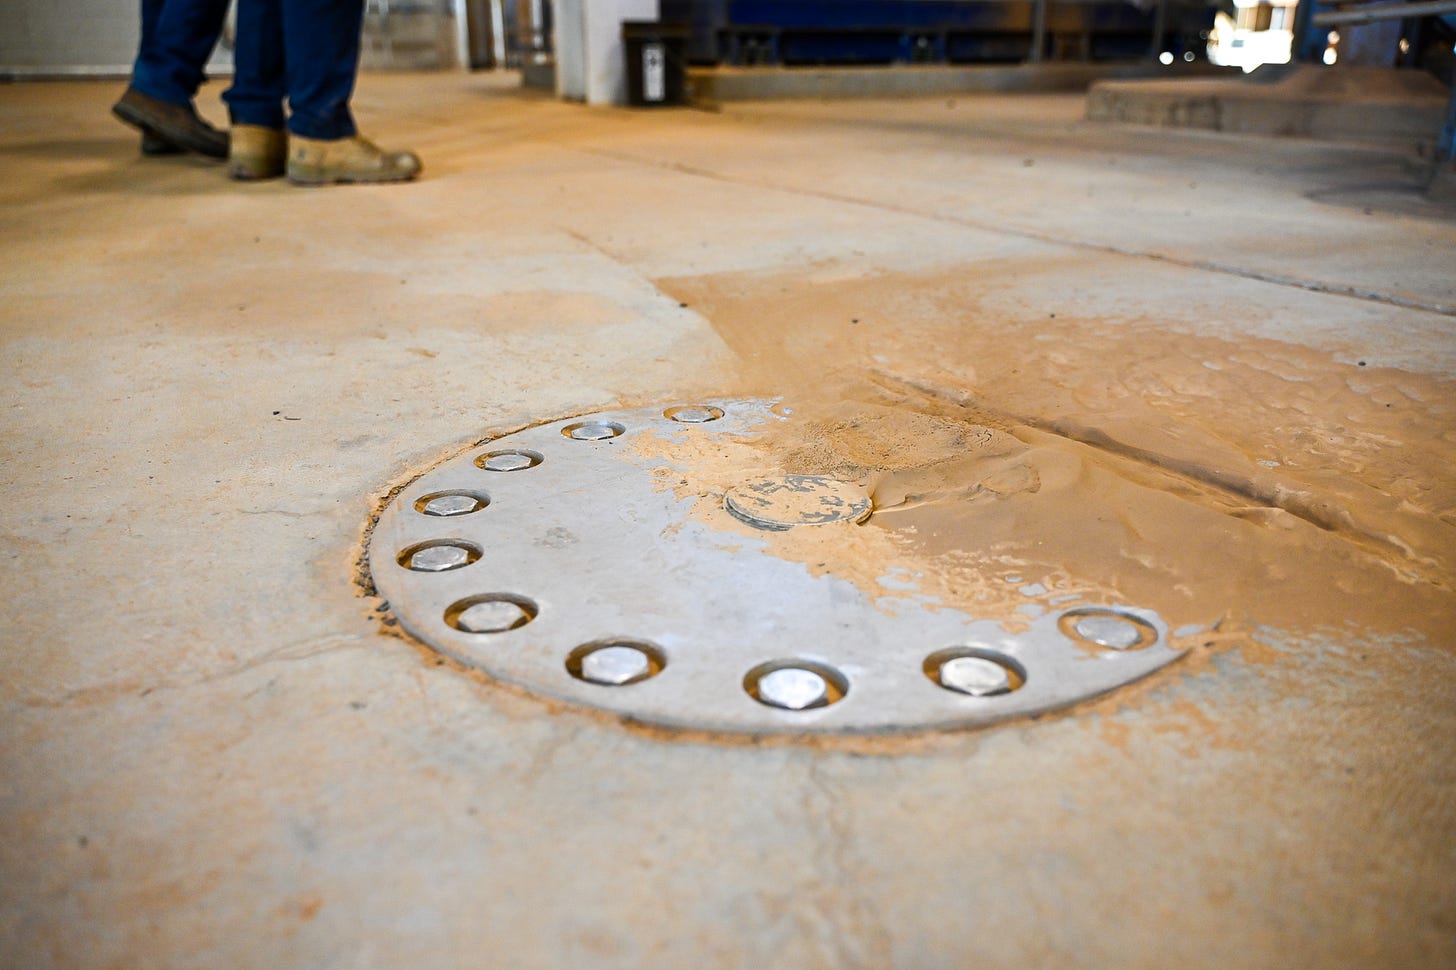 a close up of a concrete floor. in the foreground is a bolted silver cover, unknown what lies beneath, but a beige mix of sand and ash accumulate on the right edge of the cover where the bolts meet the concrete. two employees' work boots are blurred in the distance.